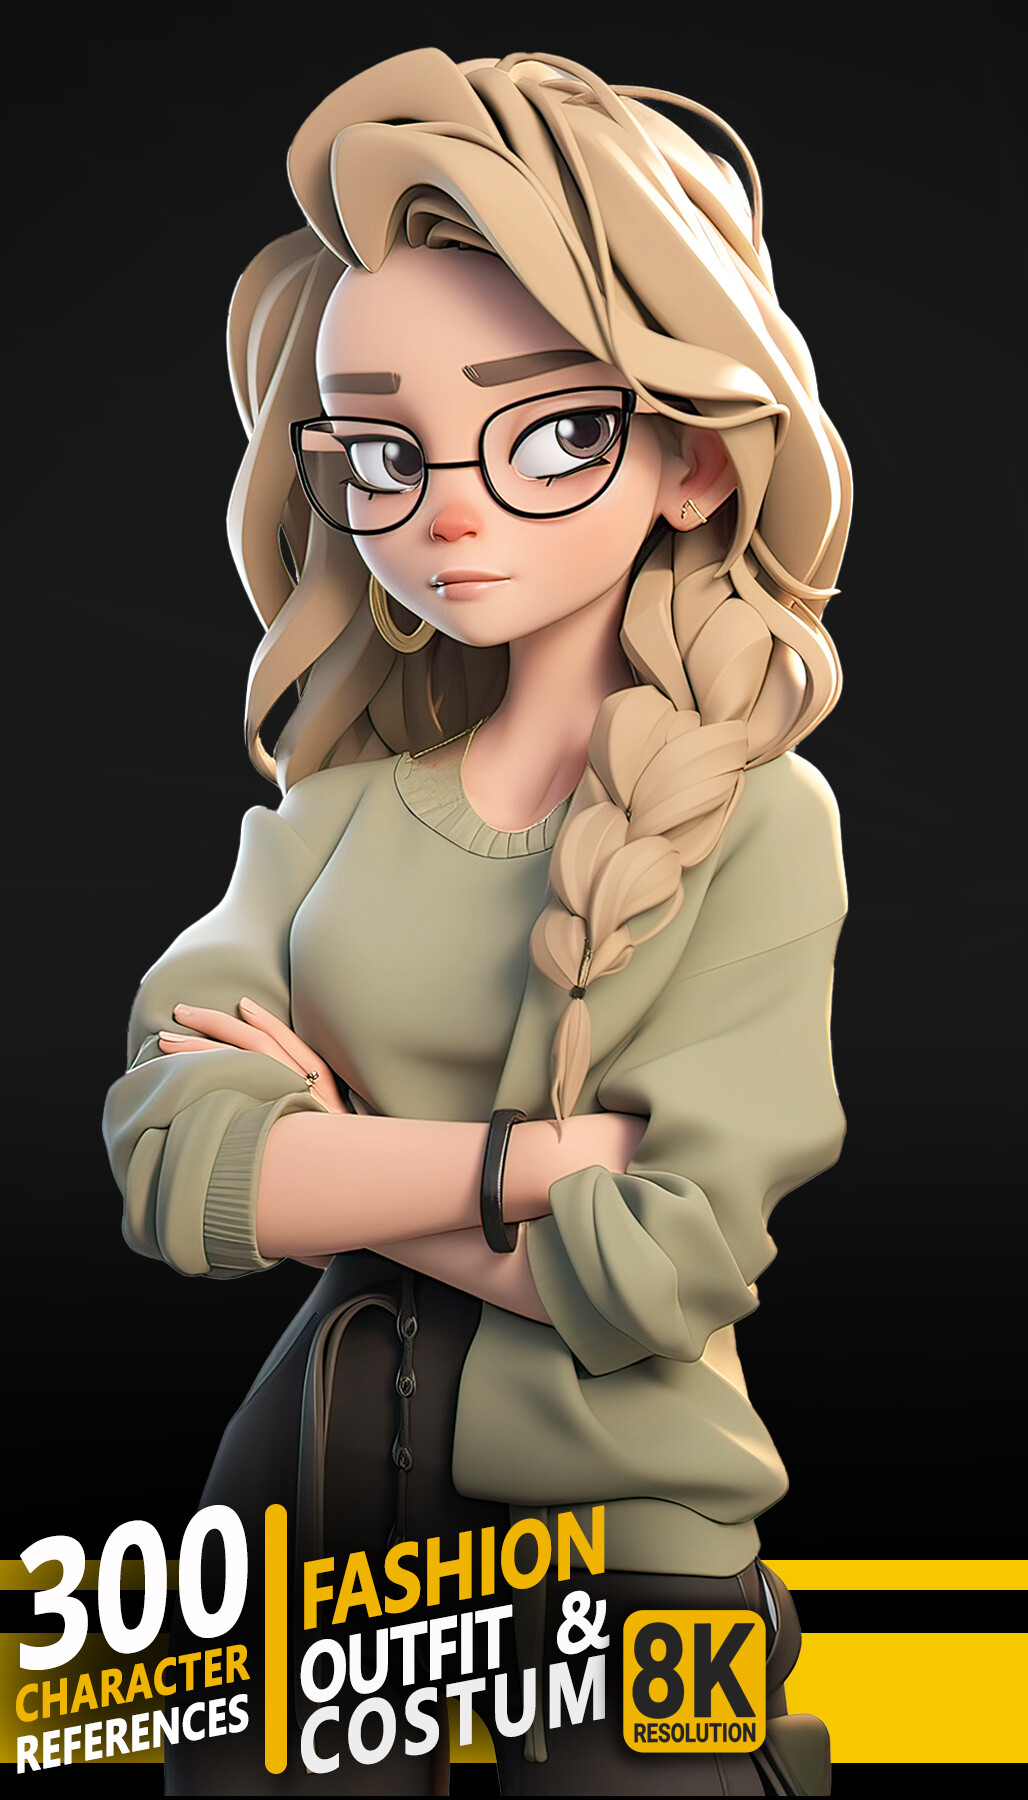 ArtStation - 300 Fashion Outfit & Costume - Character References | 8K ...